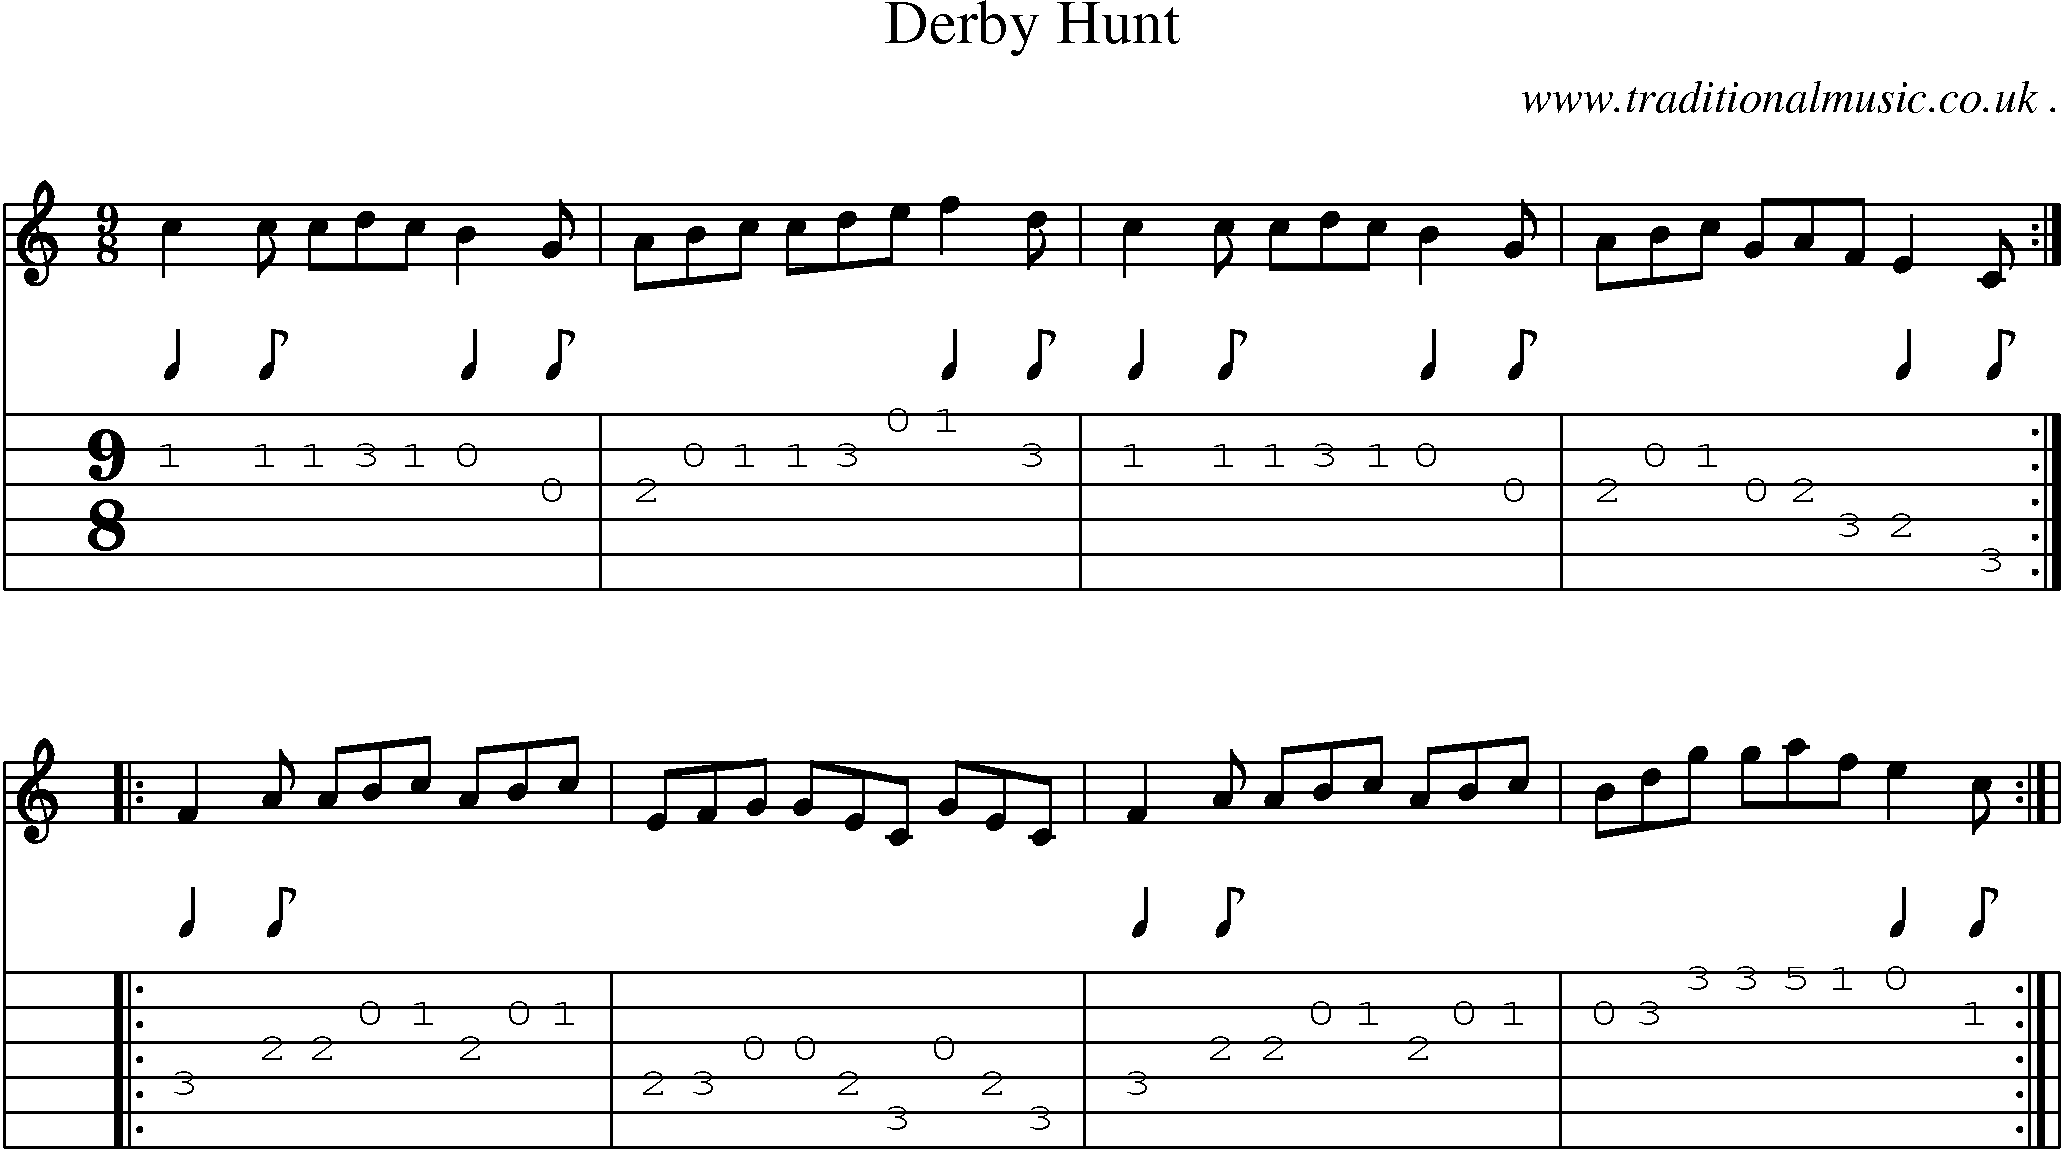 Sheet-Music and Guitar Tabs for Derby Hunt